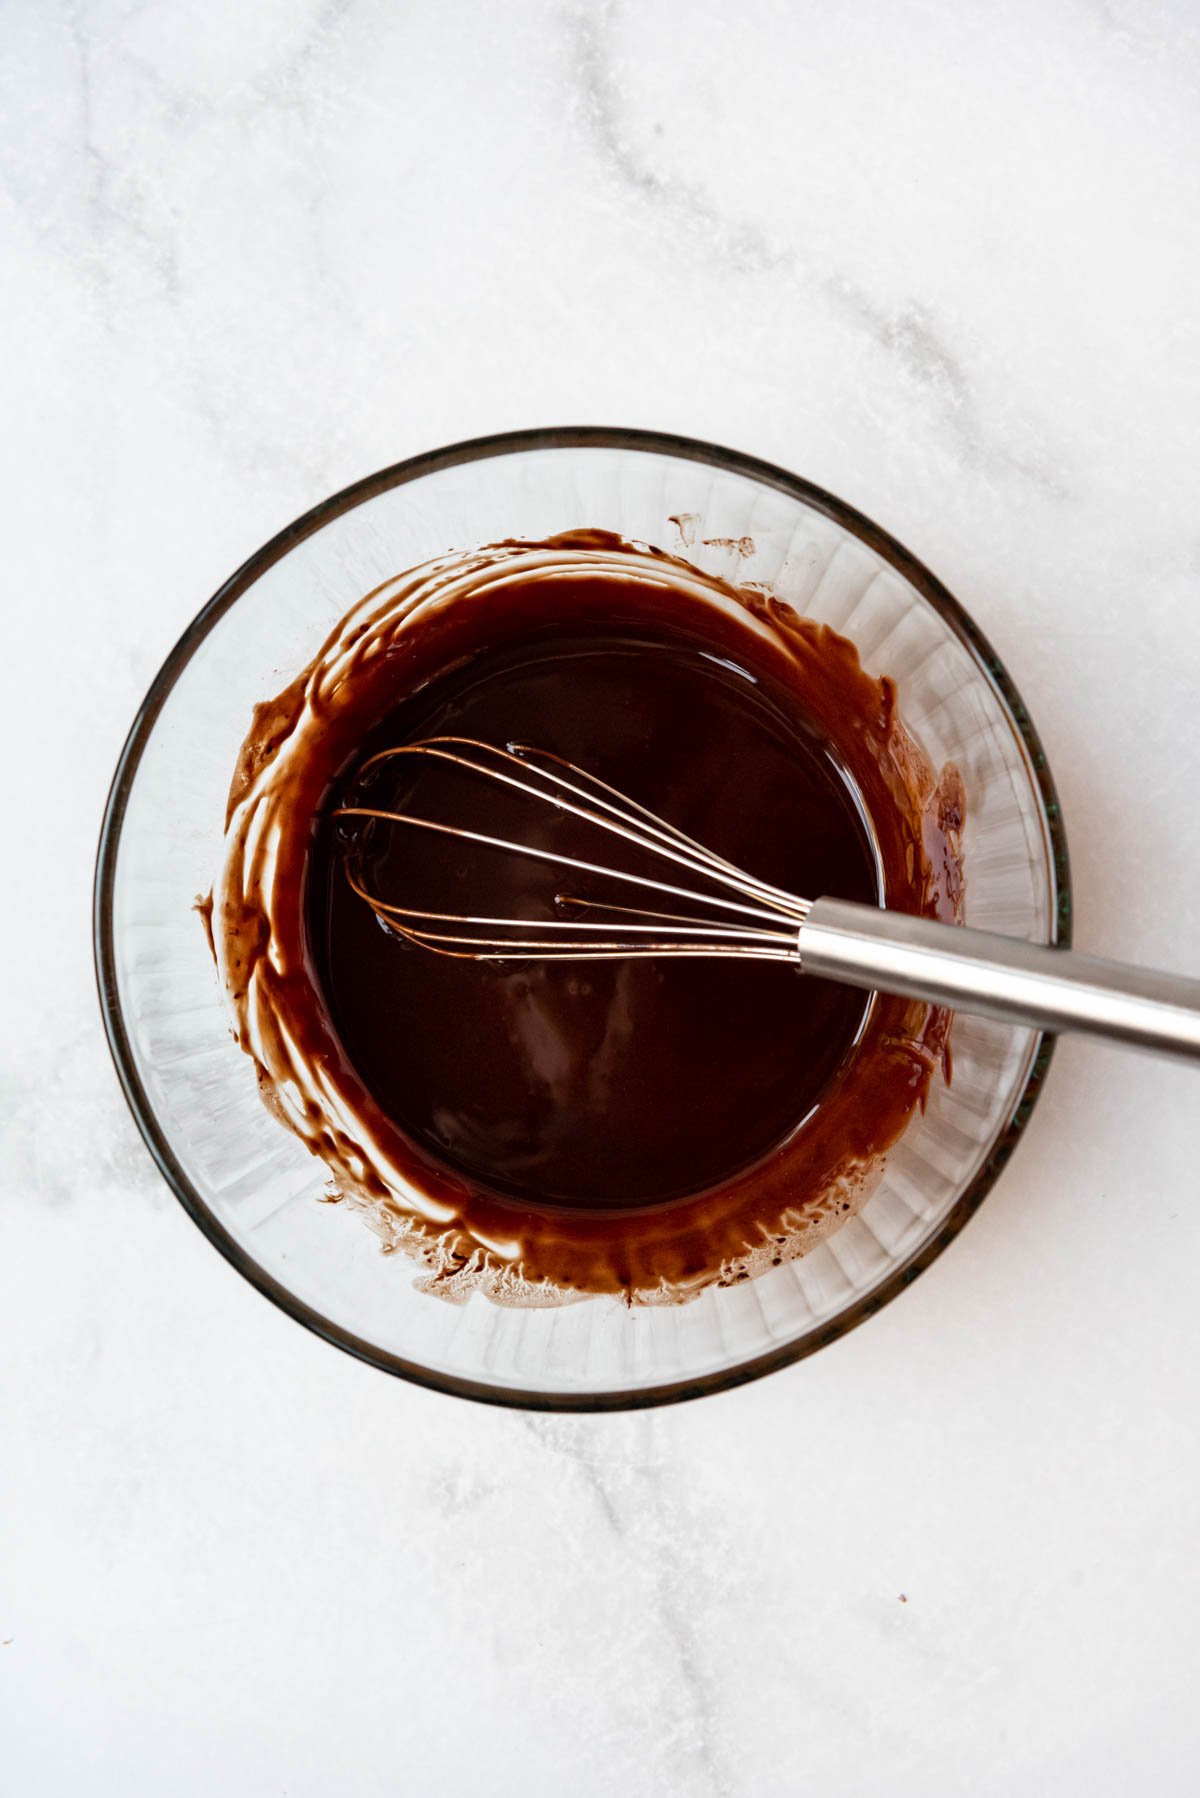 Whisking melted butter and chocolate in a glass bowl.